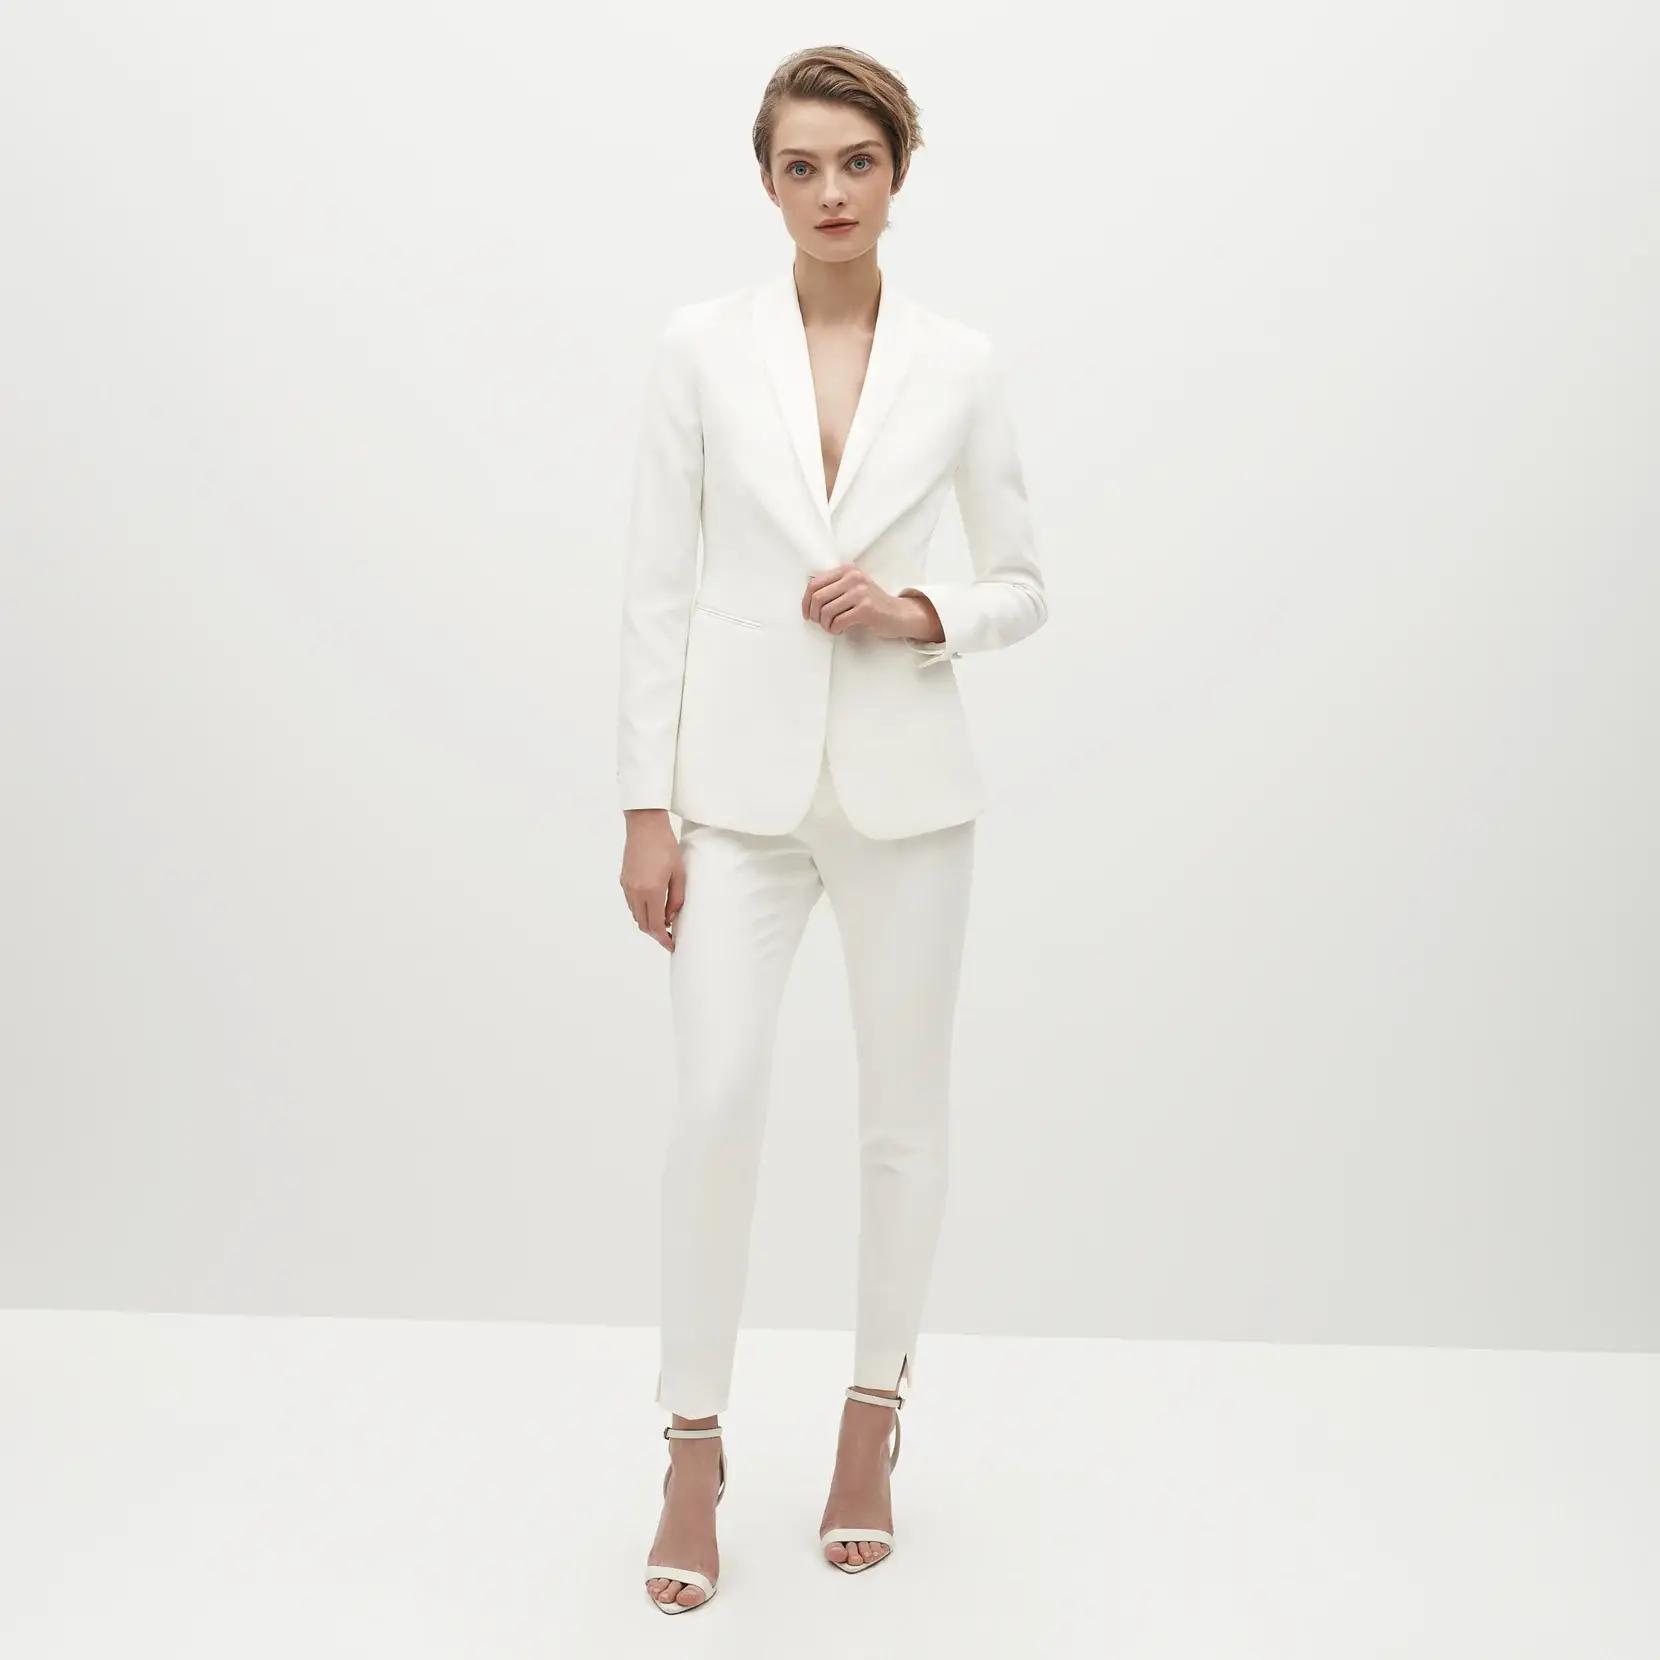 Woman in white suit